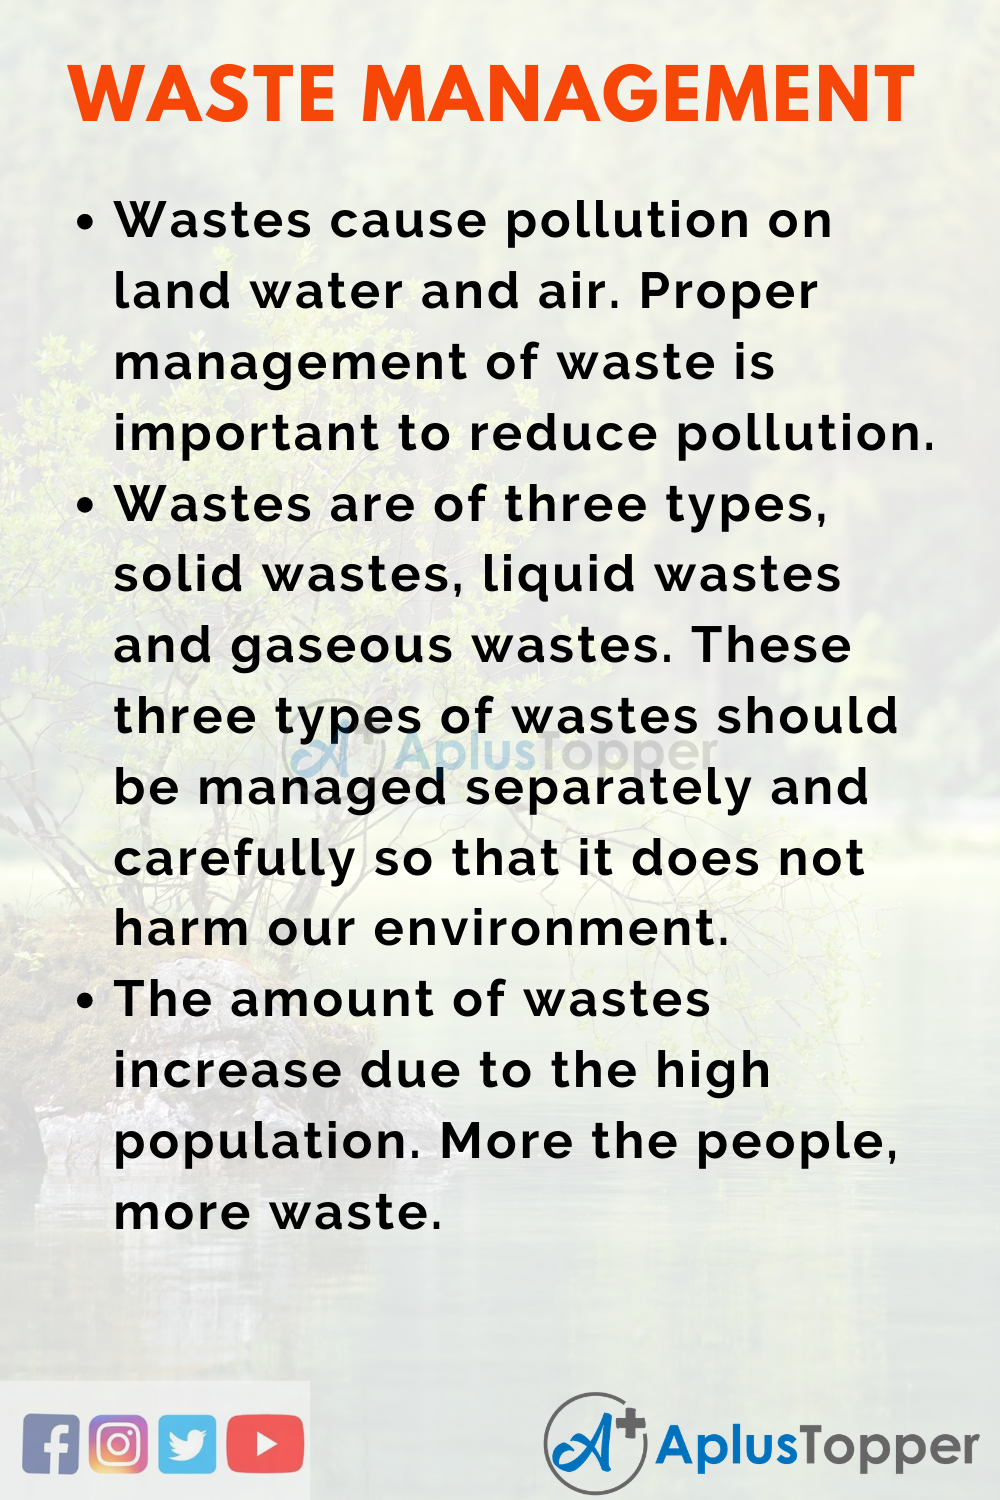 example of campaign speech about proper waste disposal